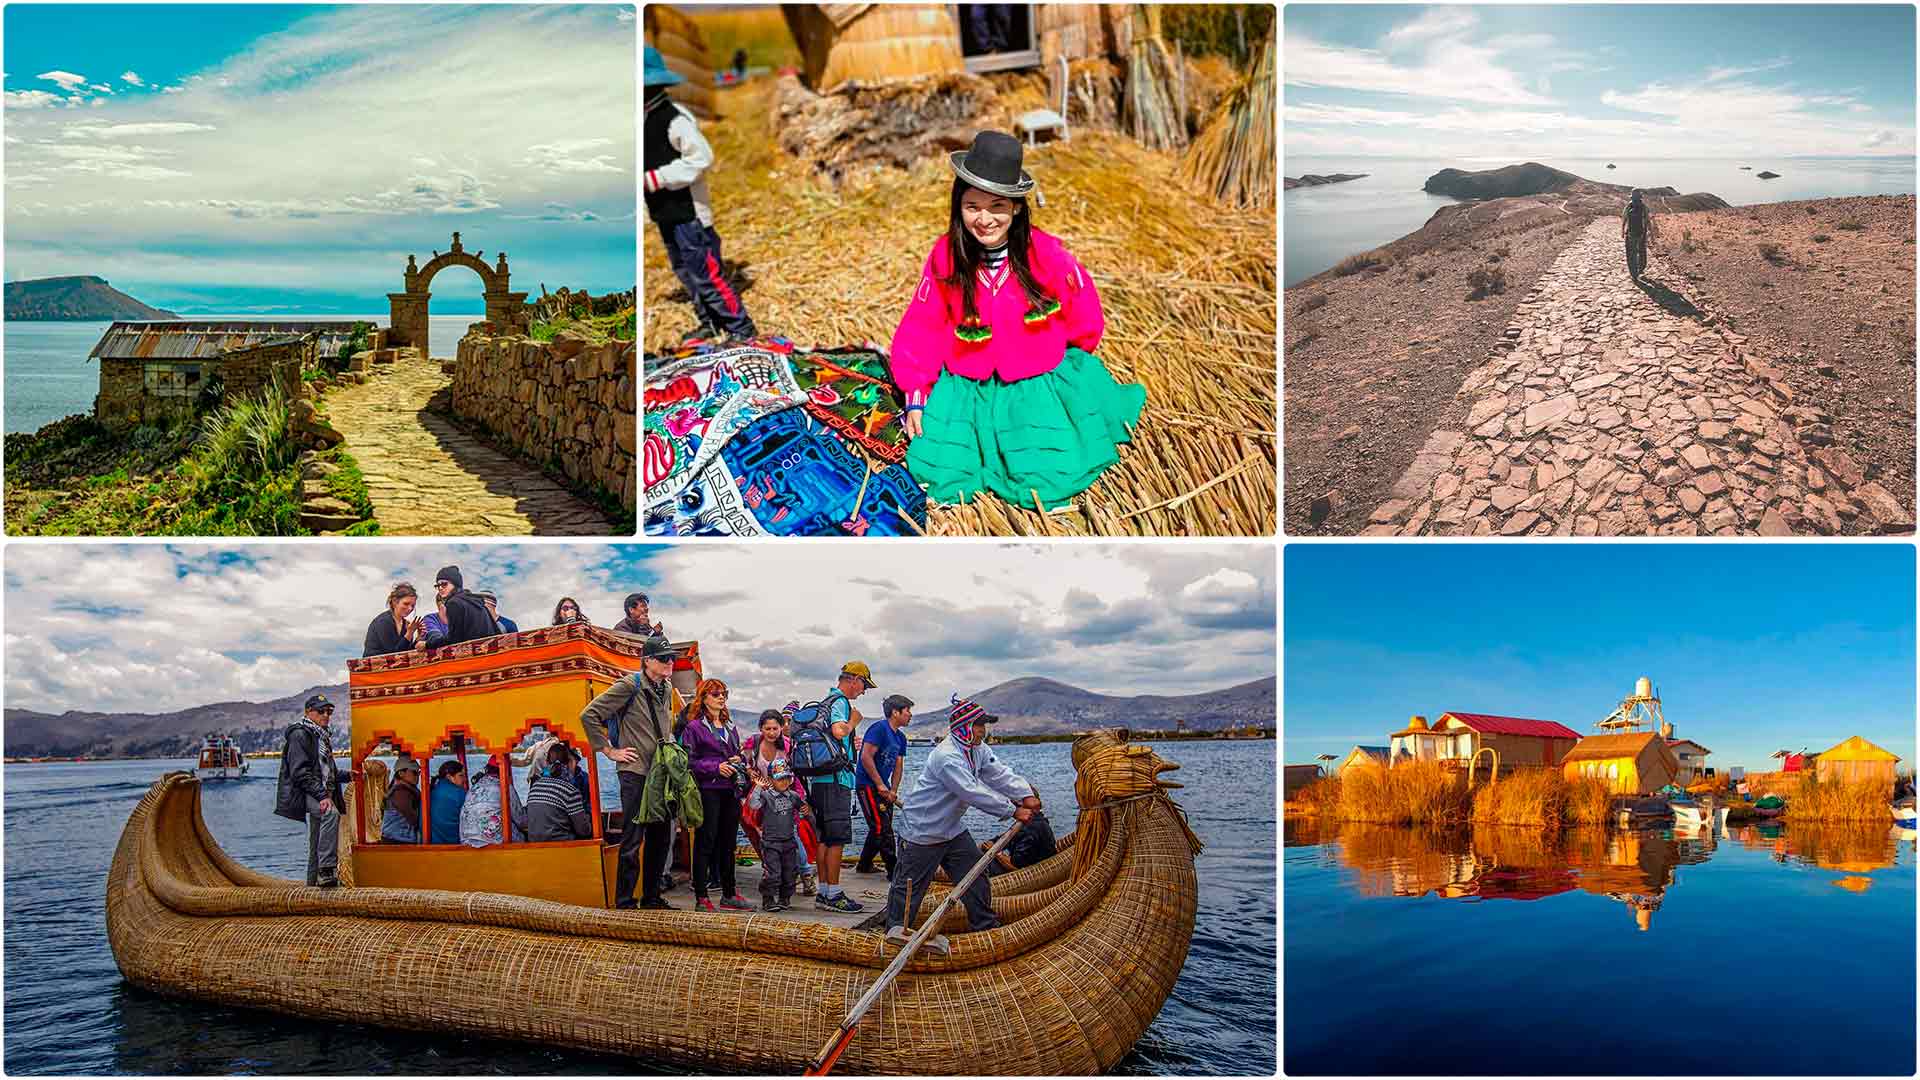 Collage of photos of the attractions in Puno